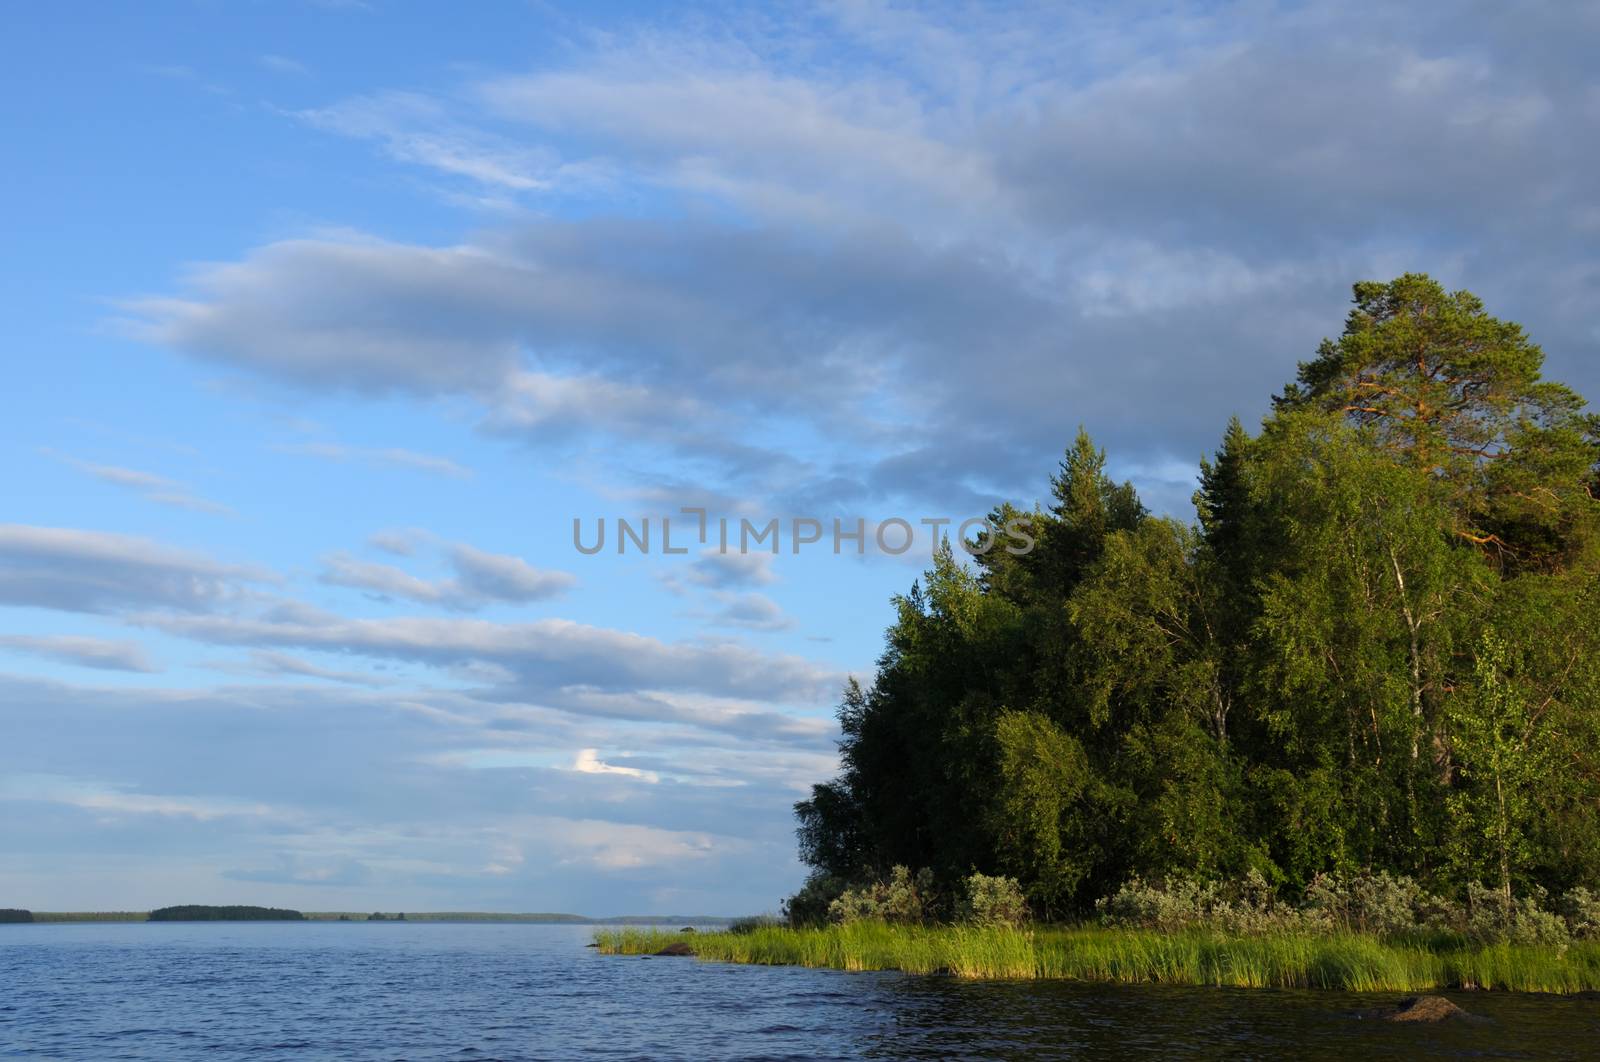 The beautiful picture of Karelian forest at the edge of a lake on a blue and cloudy sky background